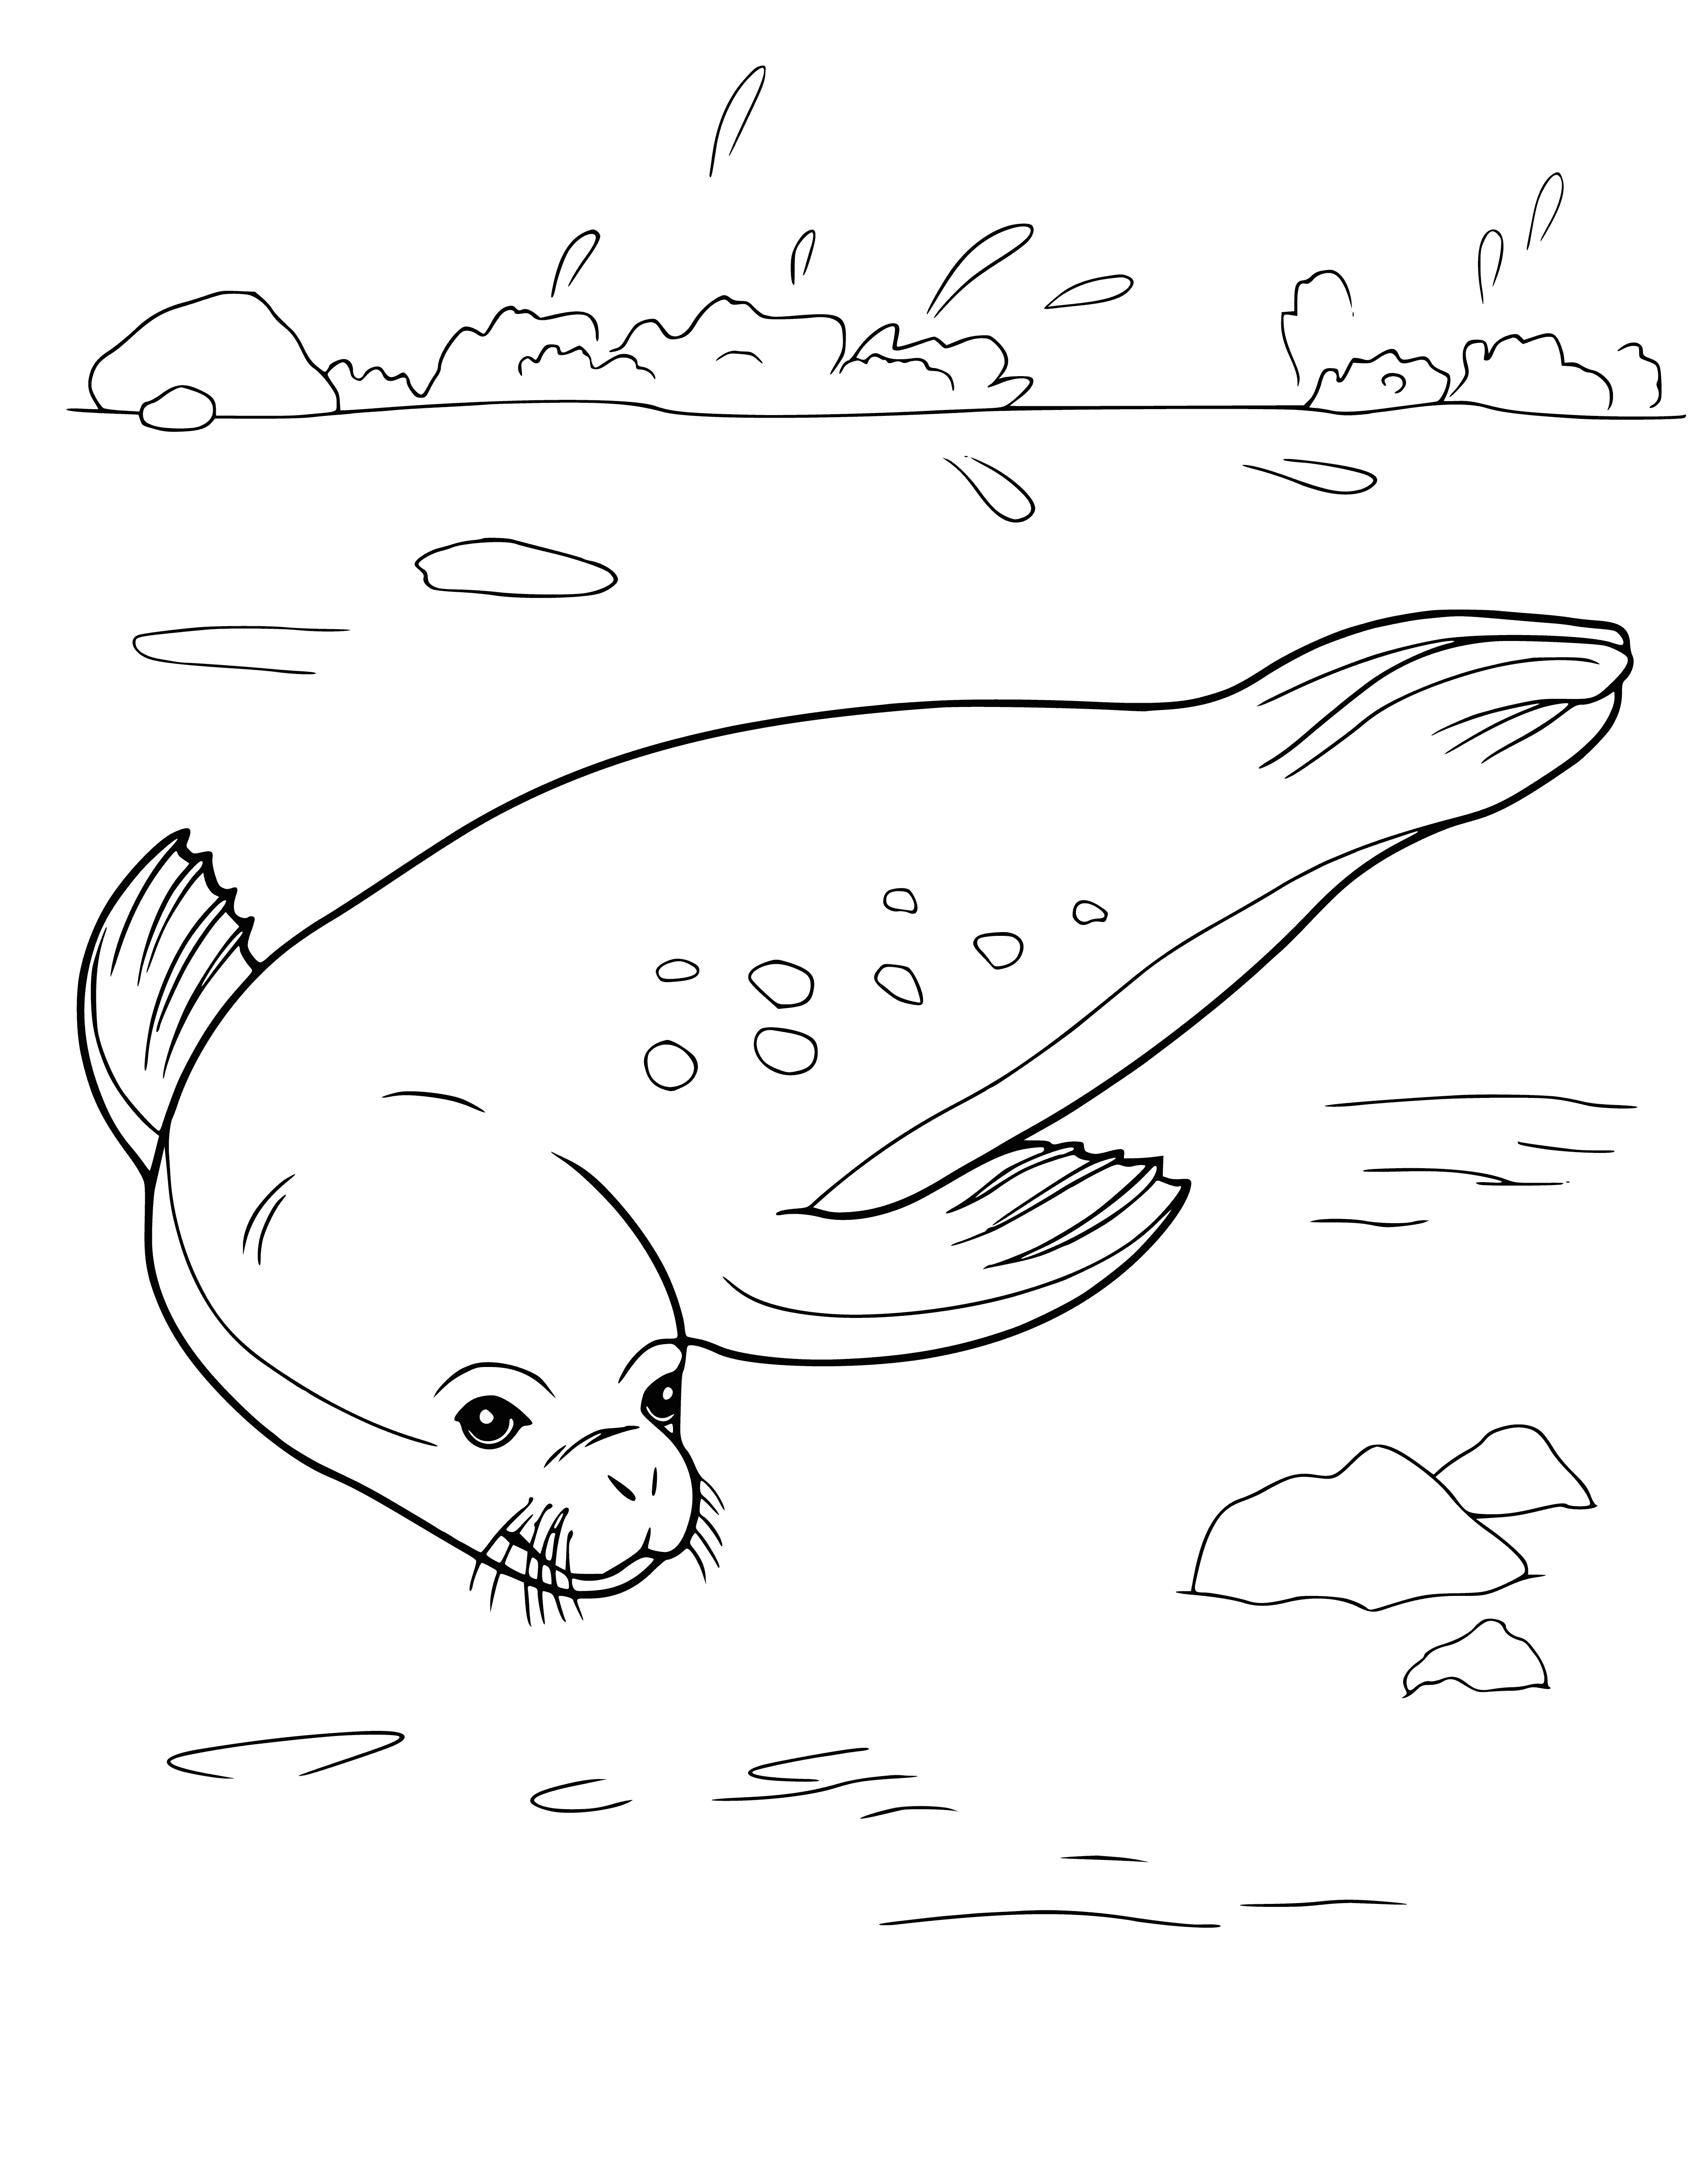 coloring page: Seals are found in most oceans and inland waters, have furry, water-resistant skin, and a long, streamlined body with flippers for swimming.